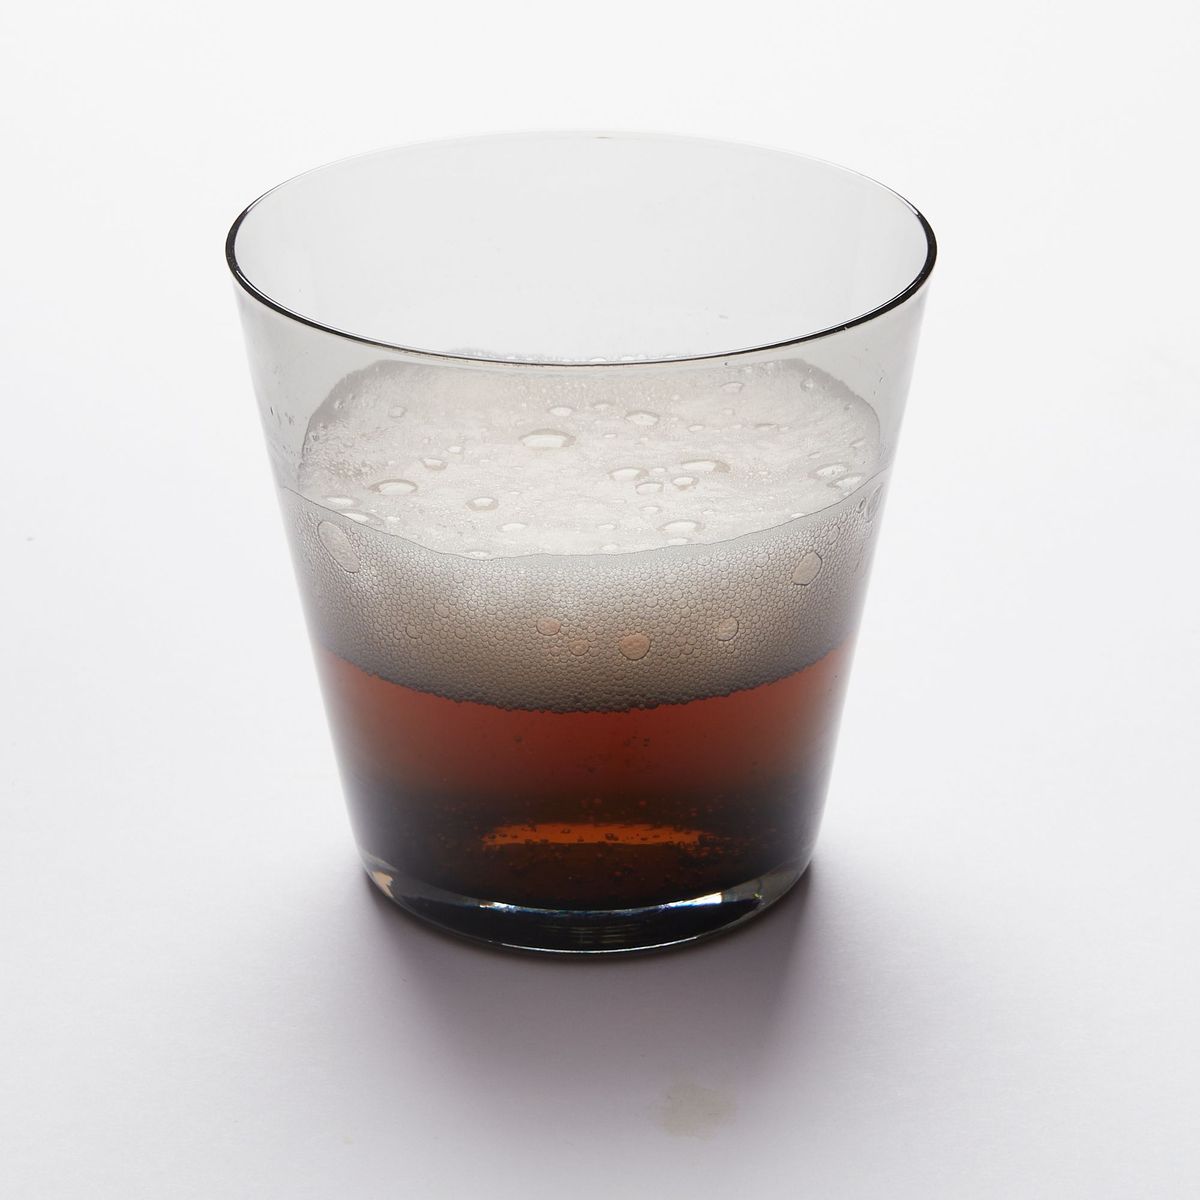 A short drinking glass made of black colored glass, half filled with an amber drink